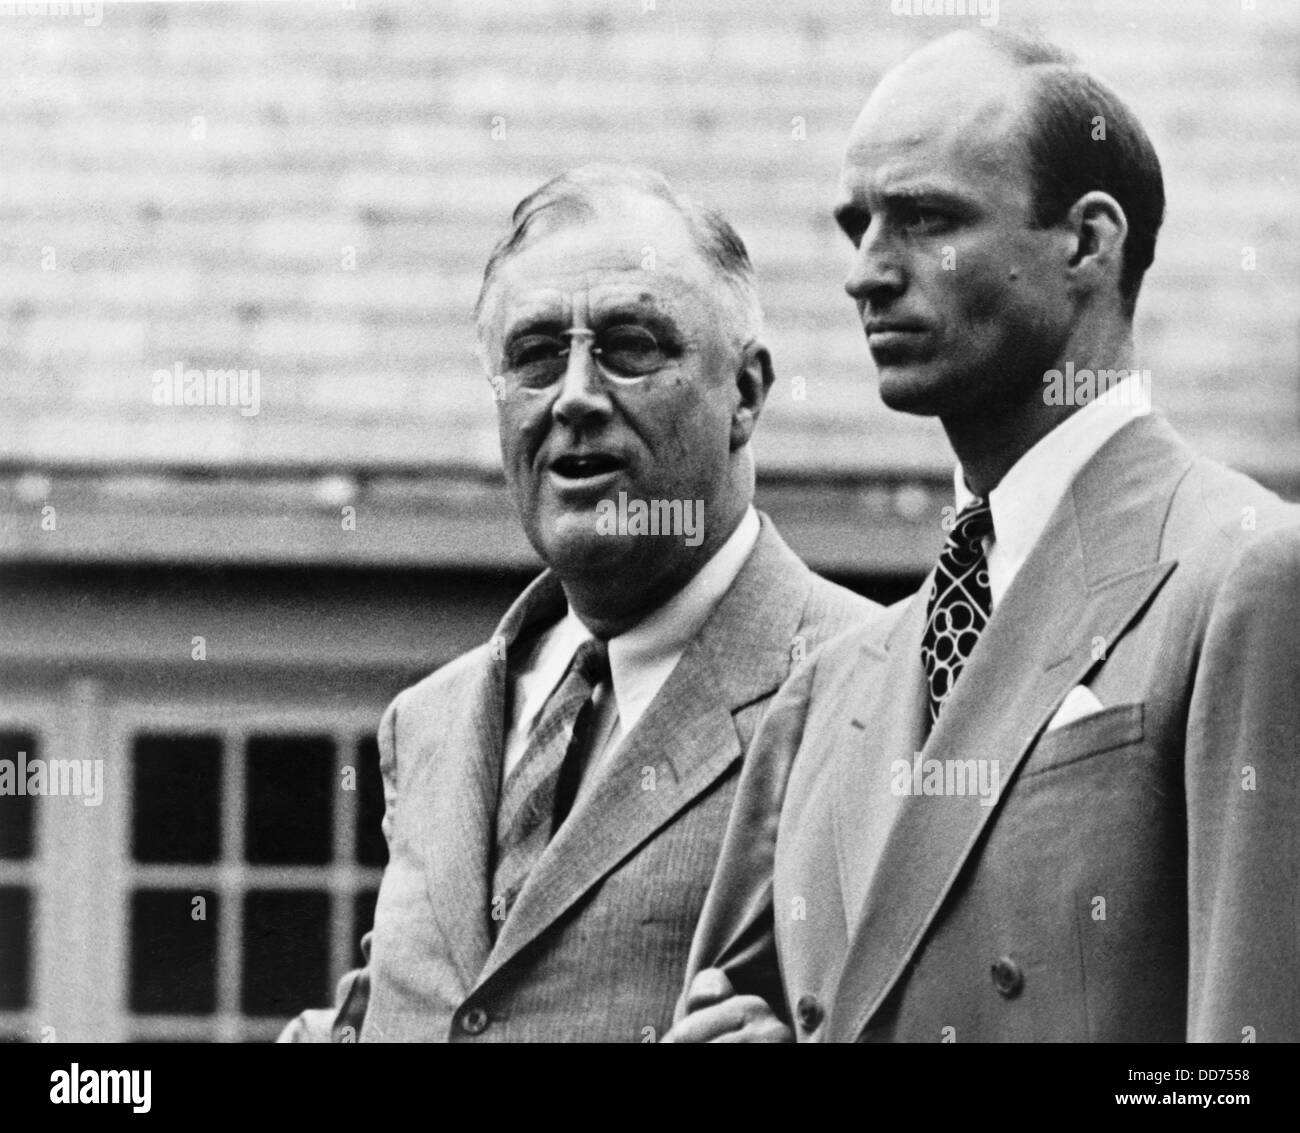 Franklin Roosevelt with his son James who served as Secretary to the President. 1940s. (BSLOC 2013 6 43) Stock Photo